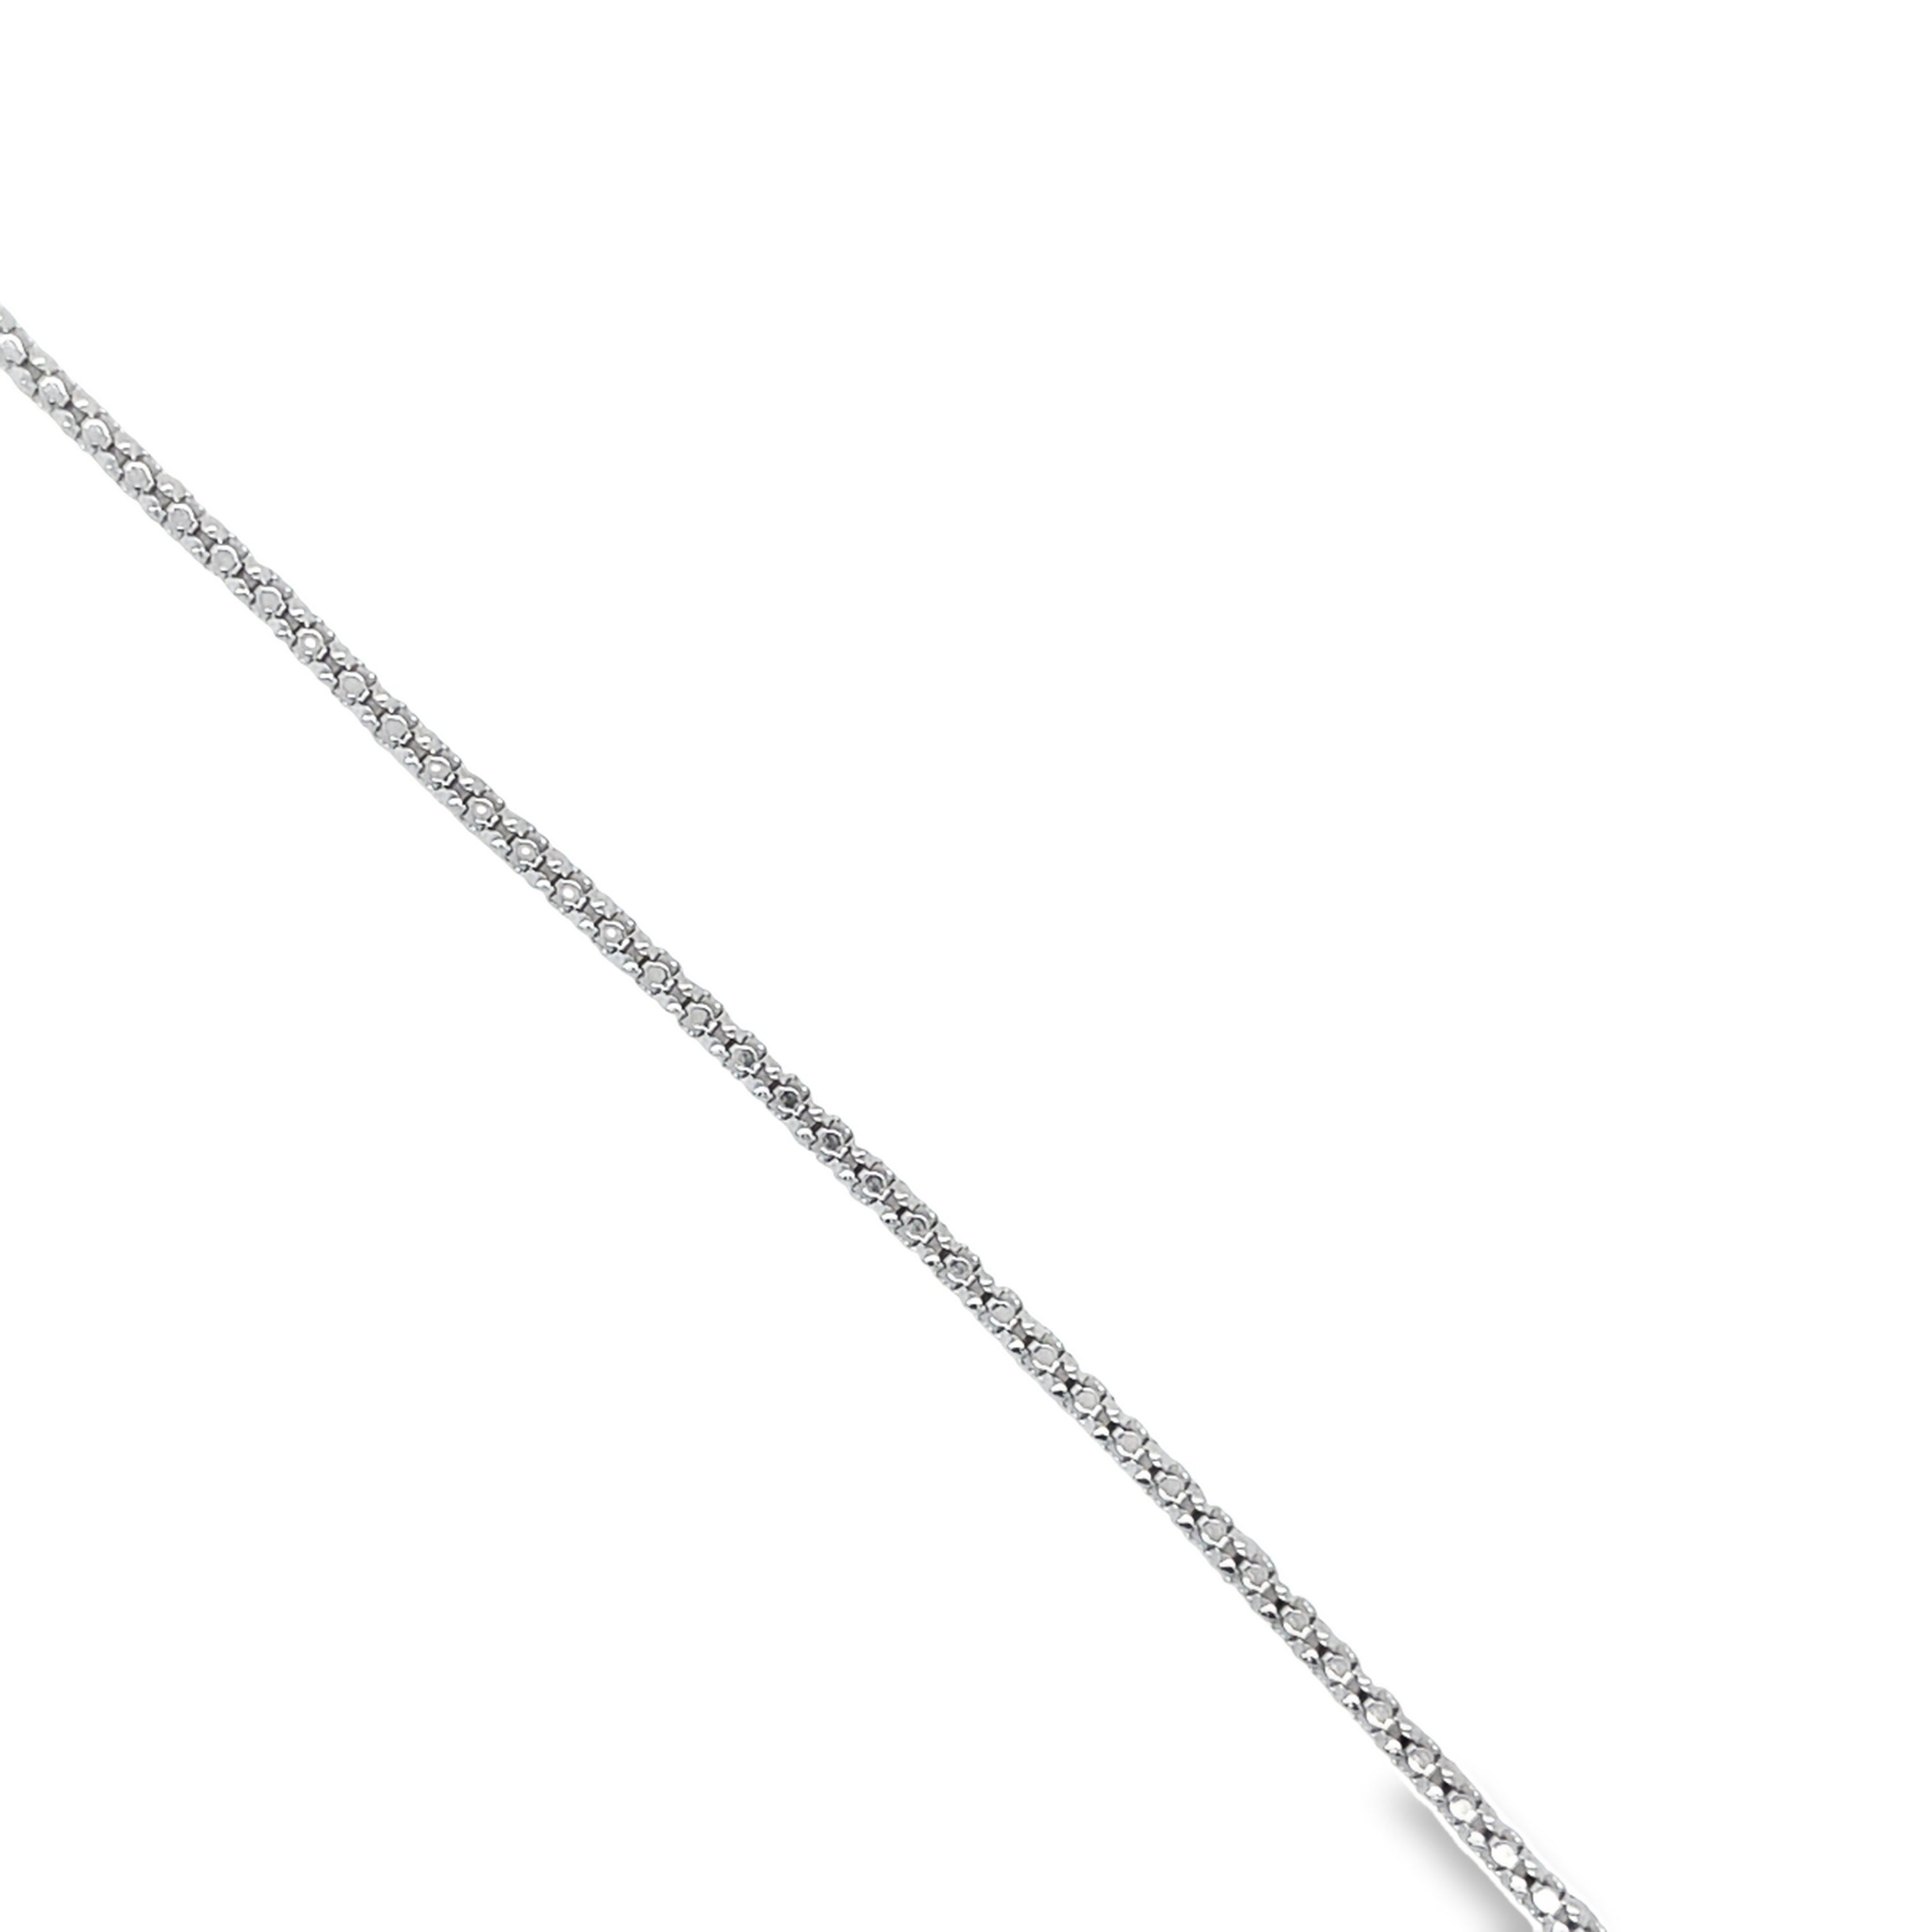 Indulge in the luxury of our Stella Bracelet, crafted from 14k Italian white gold. The stunning collection has a mesh style, 2.00 mm thickness and a secure lobster clasp for effortless wear. From our Stella Millano Italian Jewelry, this bracelet is sure to be a timeless and elegant addition to any outfit.